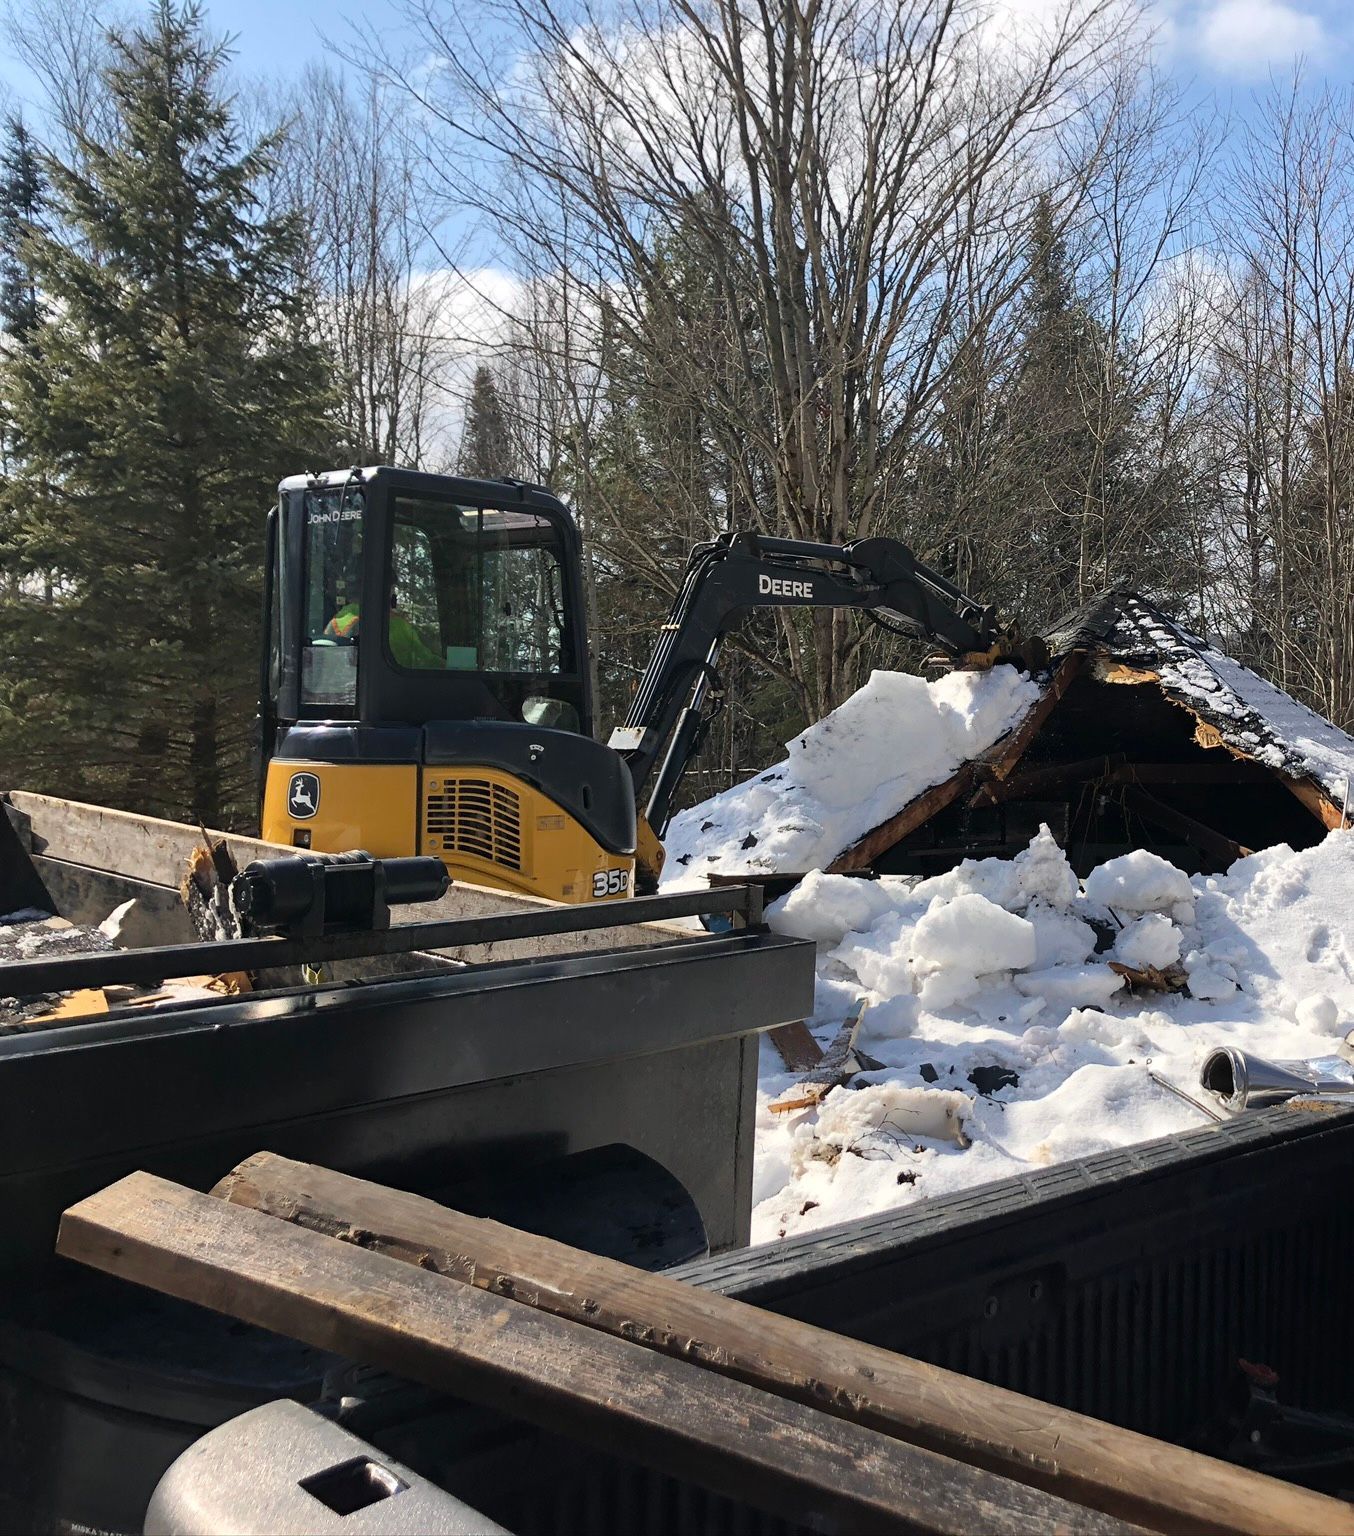 A yellow and black excavator is sitting on top of a pile of snow.